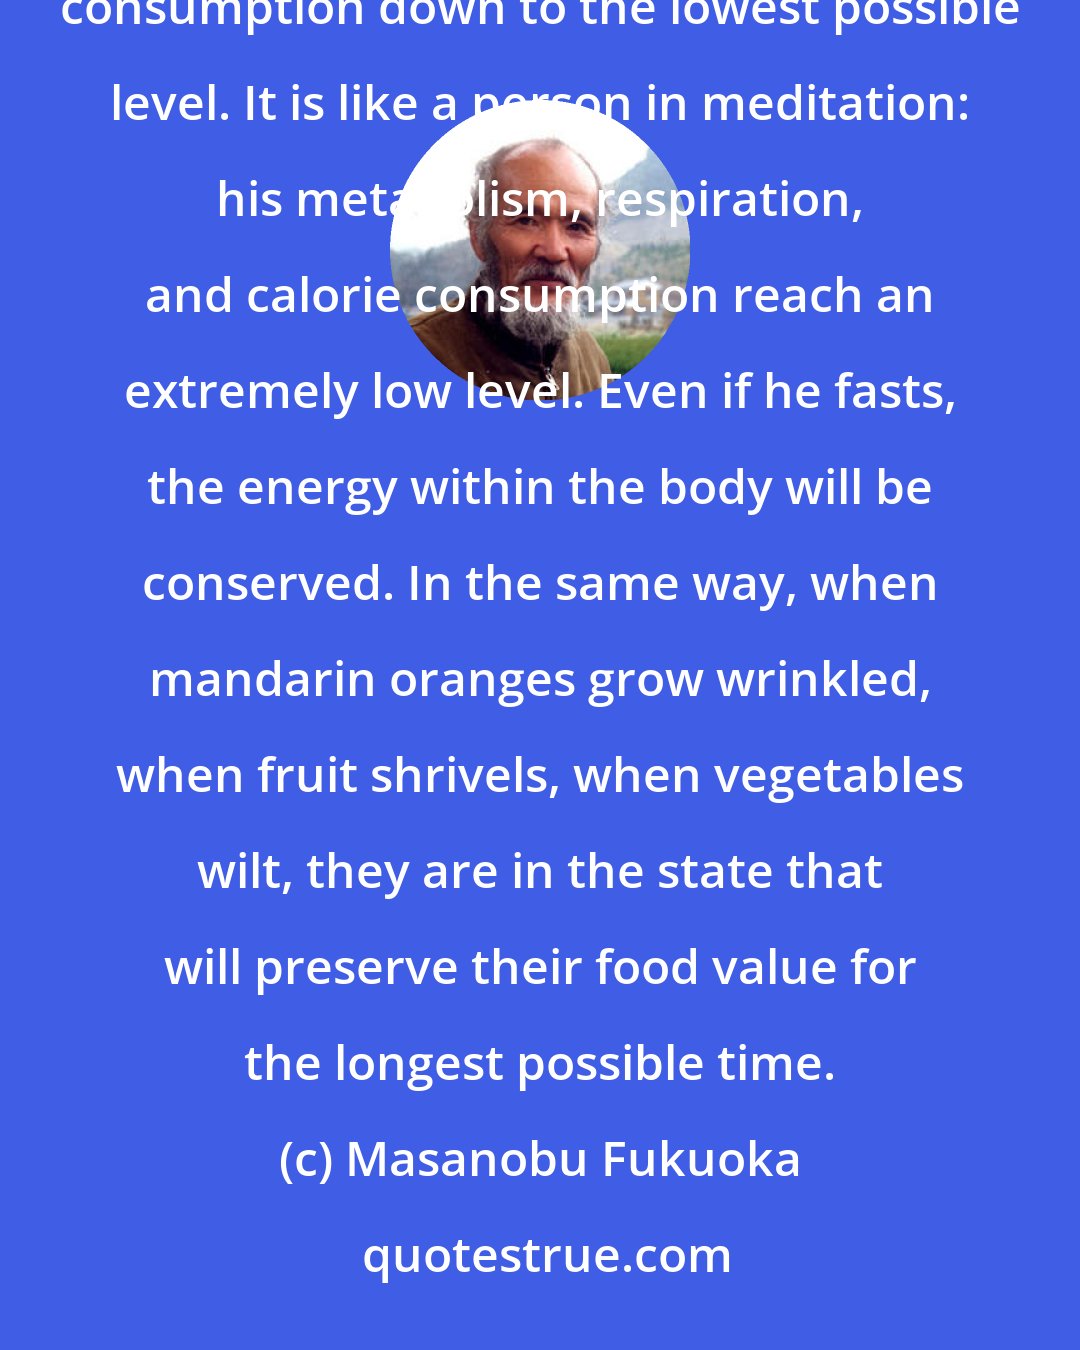 Masanobu Fukuoka: Speaking biologically, fruit in a slightly shriveled state is holding its respiration and energy consumption down to the lowest possible level. It is like a person in meditation: his metabolism, respiration, and calorie consumption reach an extremely low level. Even if he fasts, the energy within the body will be conserved. In the same way, when mandarin oranges grow wrinkled, when fruit shrivels, when vegetables wilt, they are in the state that will preserve their food value for the longest possible time.